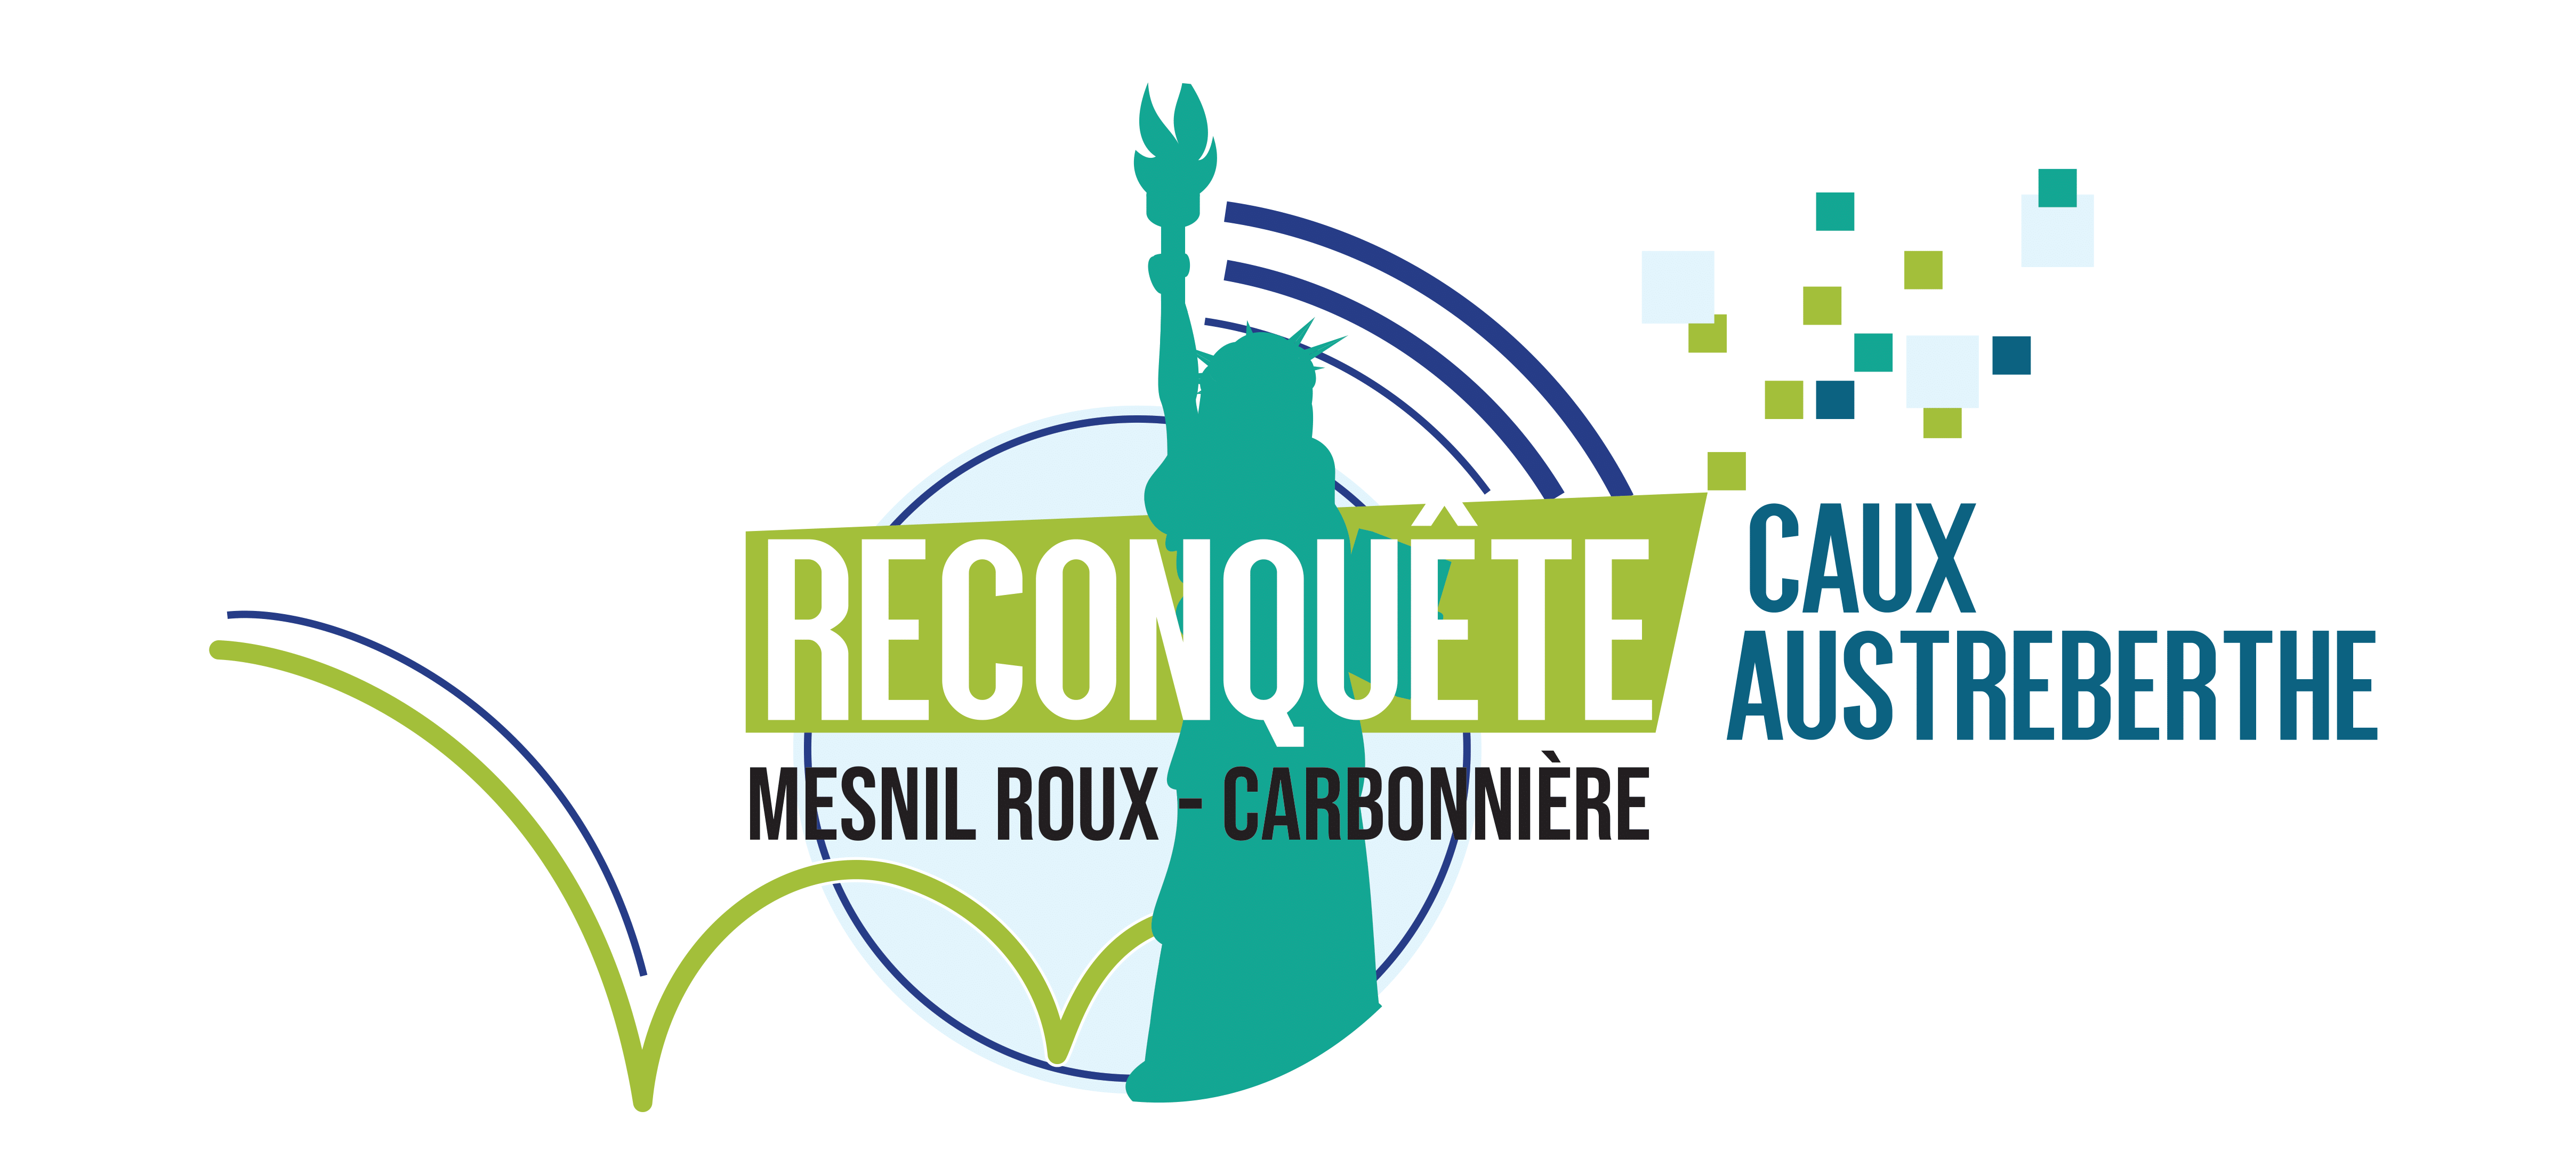 reconquete mesnil NEW-5